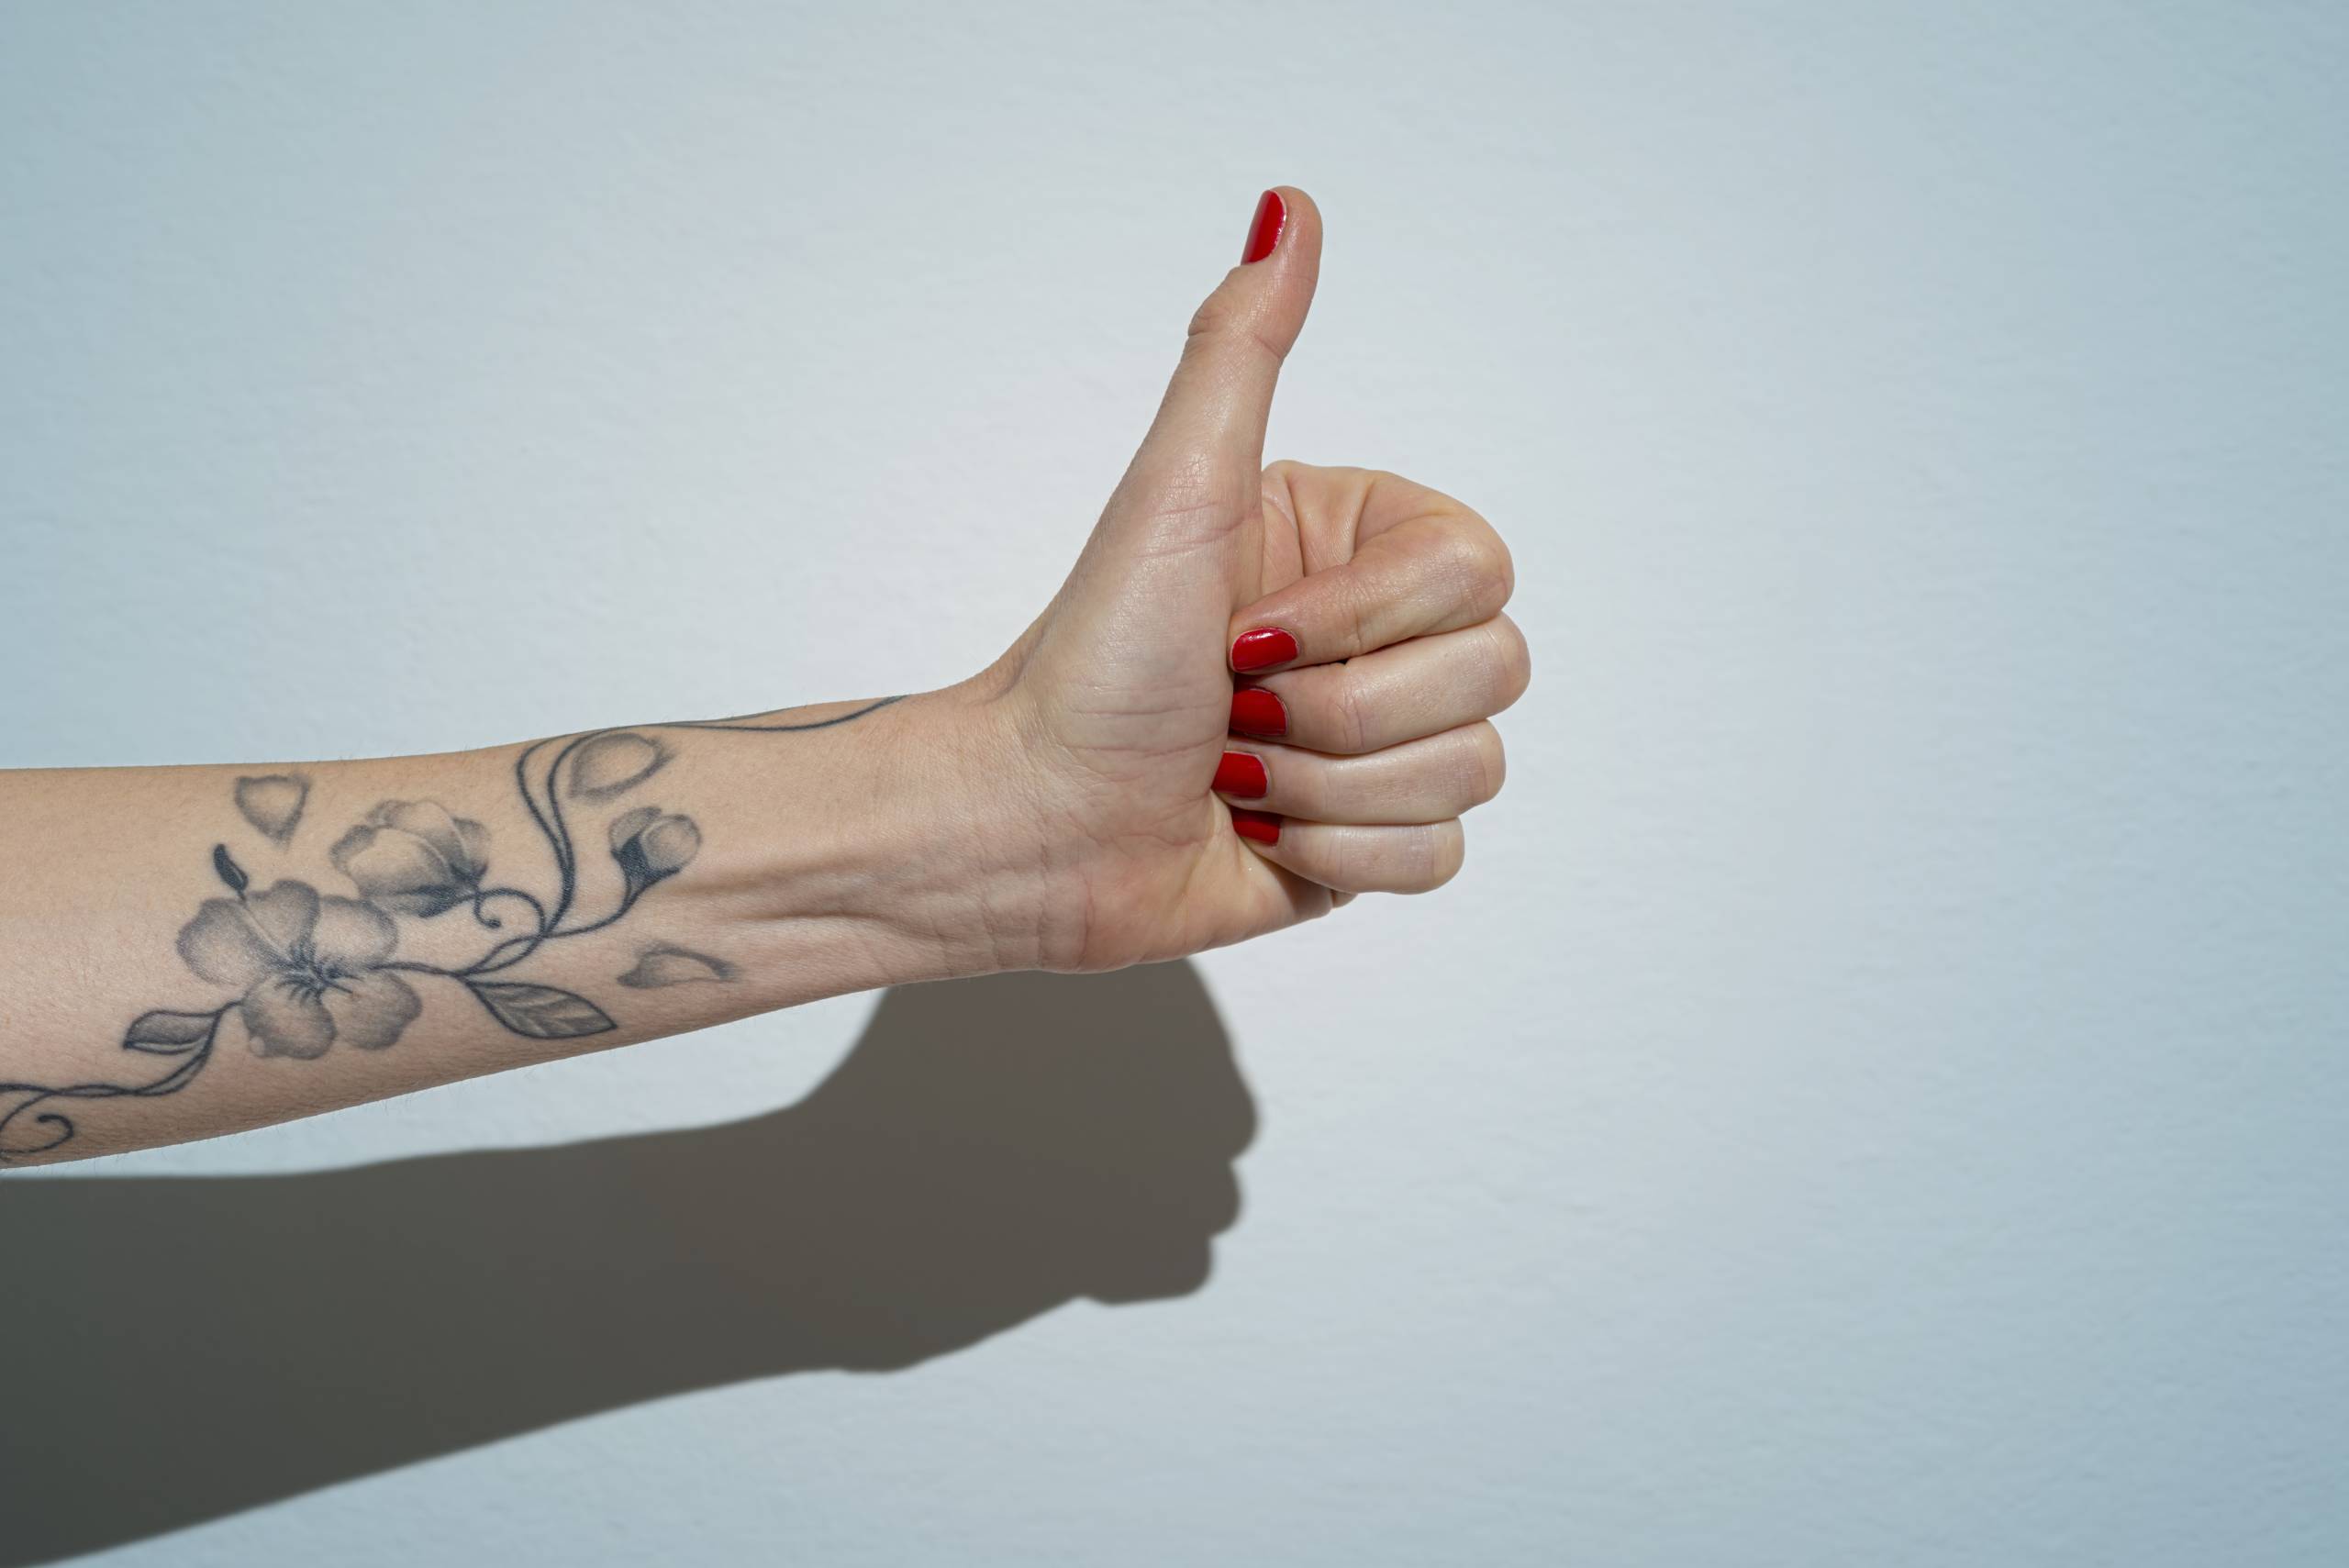 Woman's hand making thumbs up sign against a light blue wall. She has red nail polish and delicate flowers tattooed on her forearm.